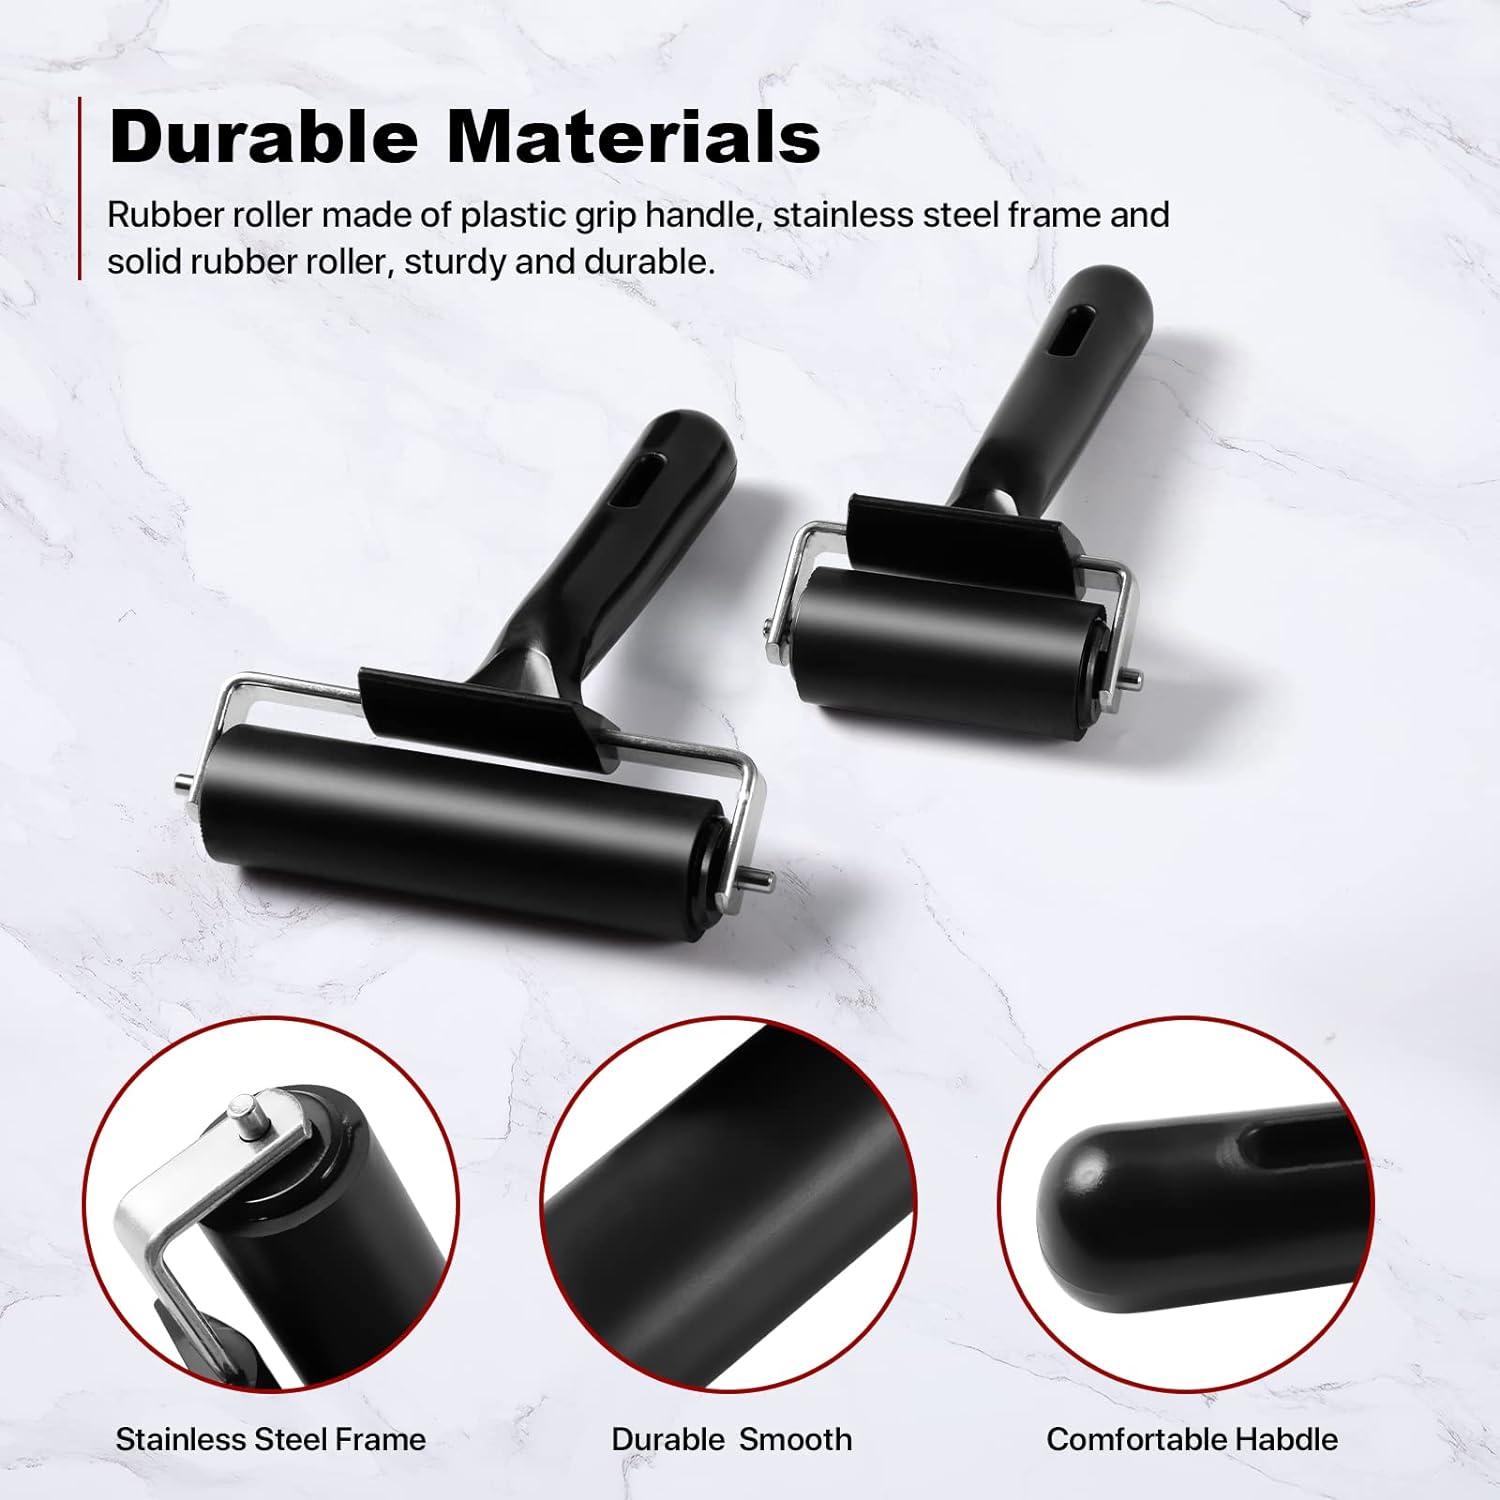 3 Pack Brayer Rollers for Crafting Vinyl Rubber Roller Brayers Printmaking  Brayer Rollers for Cricut Maker Gluing Printing Inking and Stamping(Black)  Balck